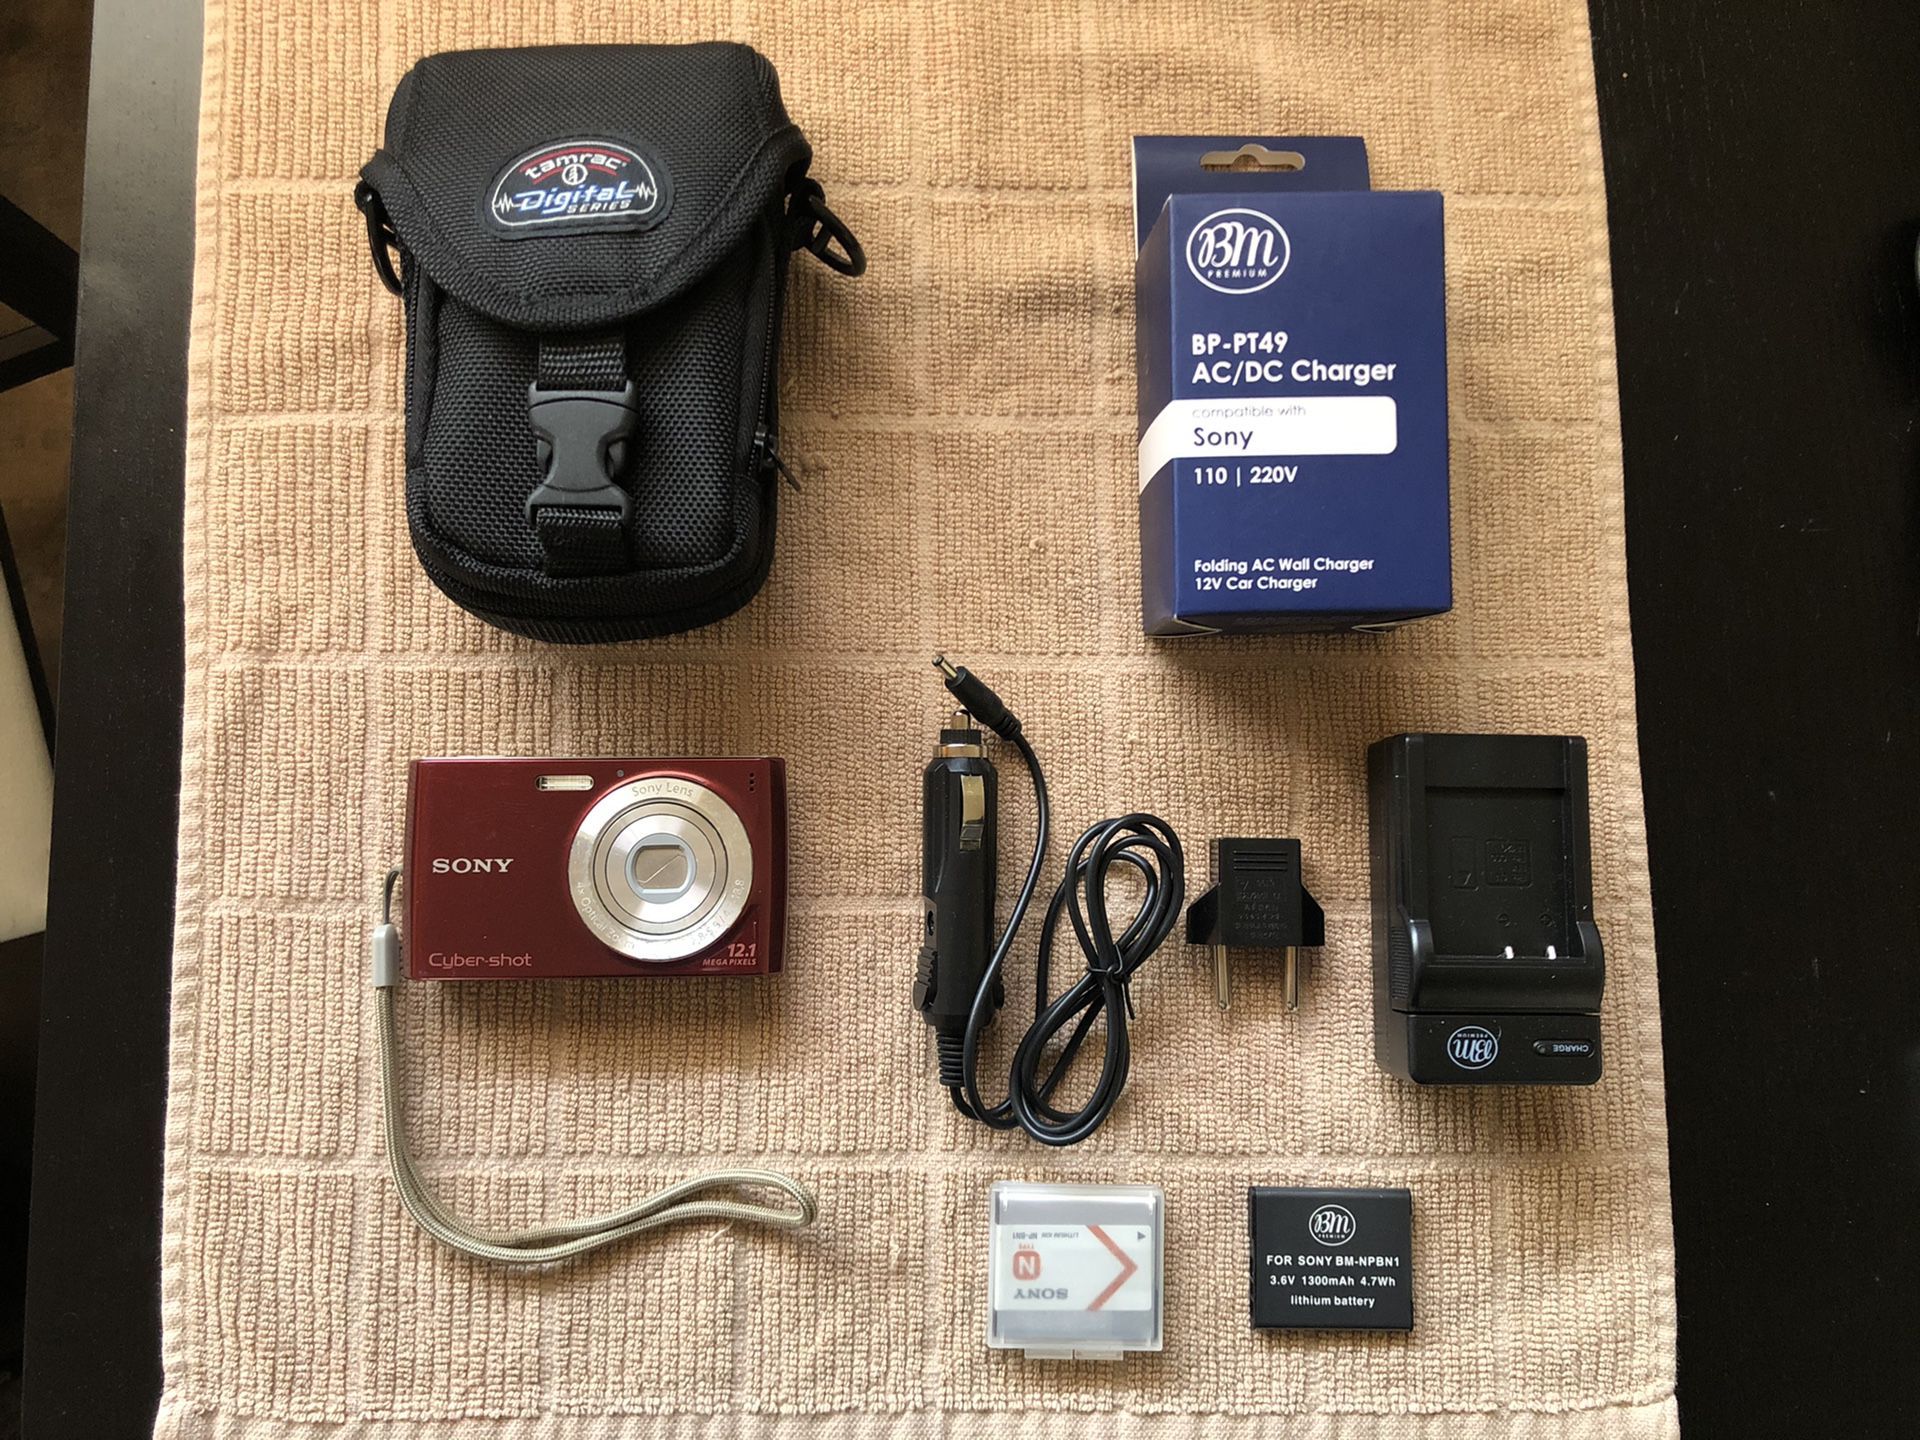 Sony Digital Camera and Accessories - Extra Battery